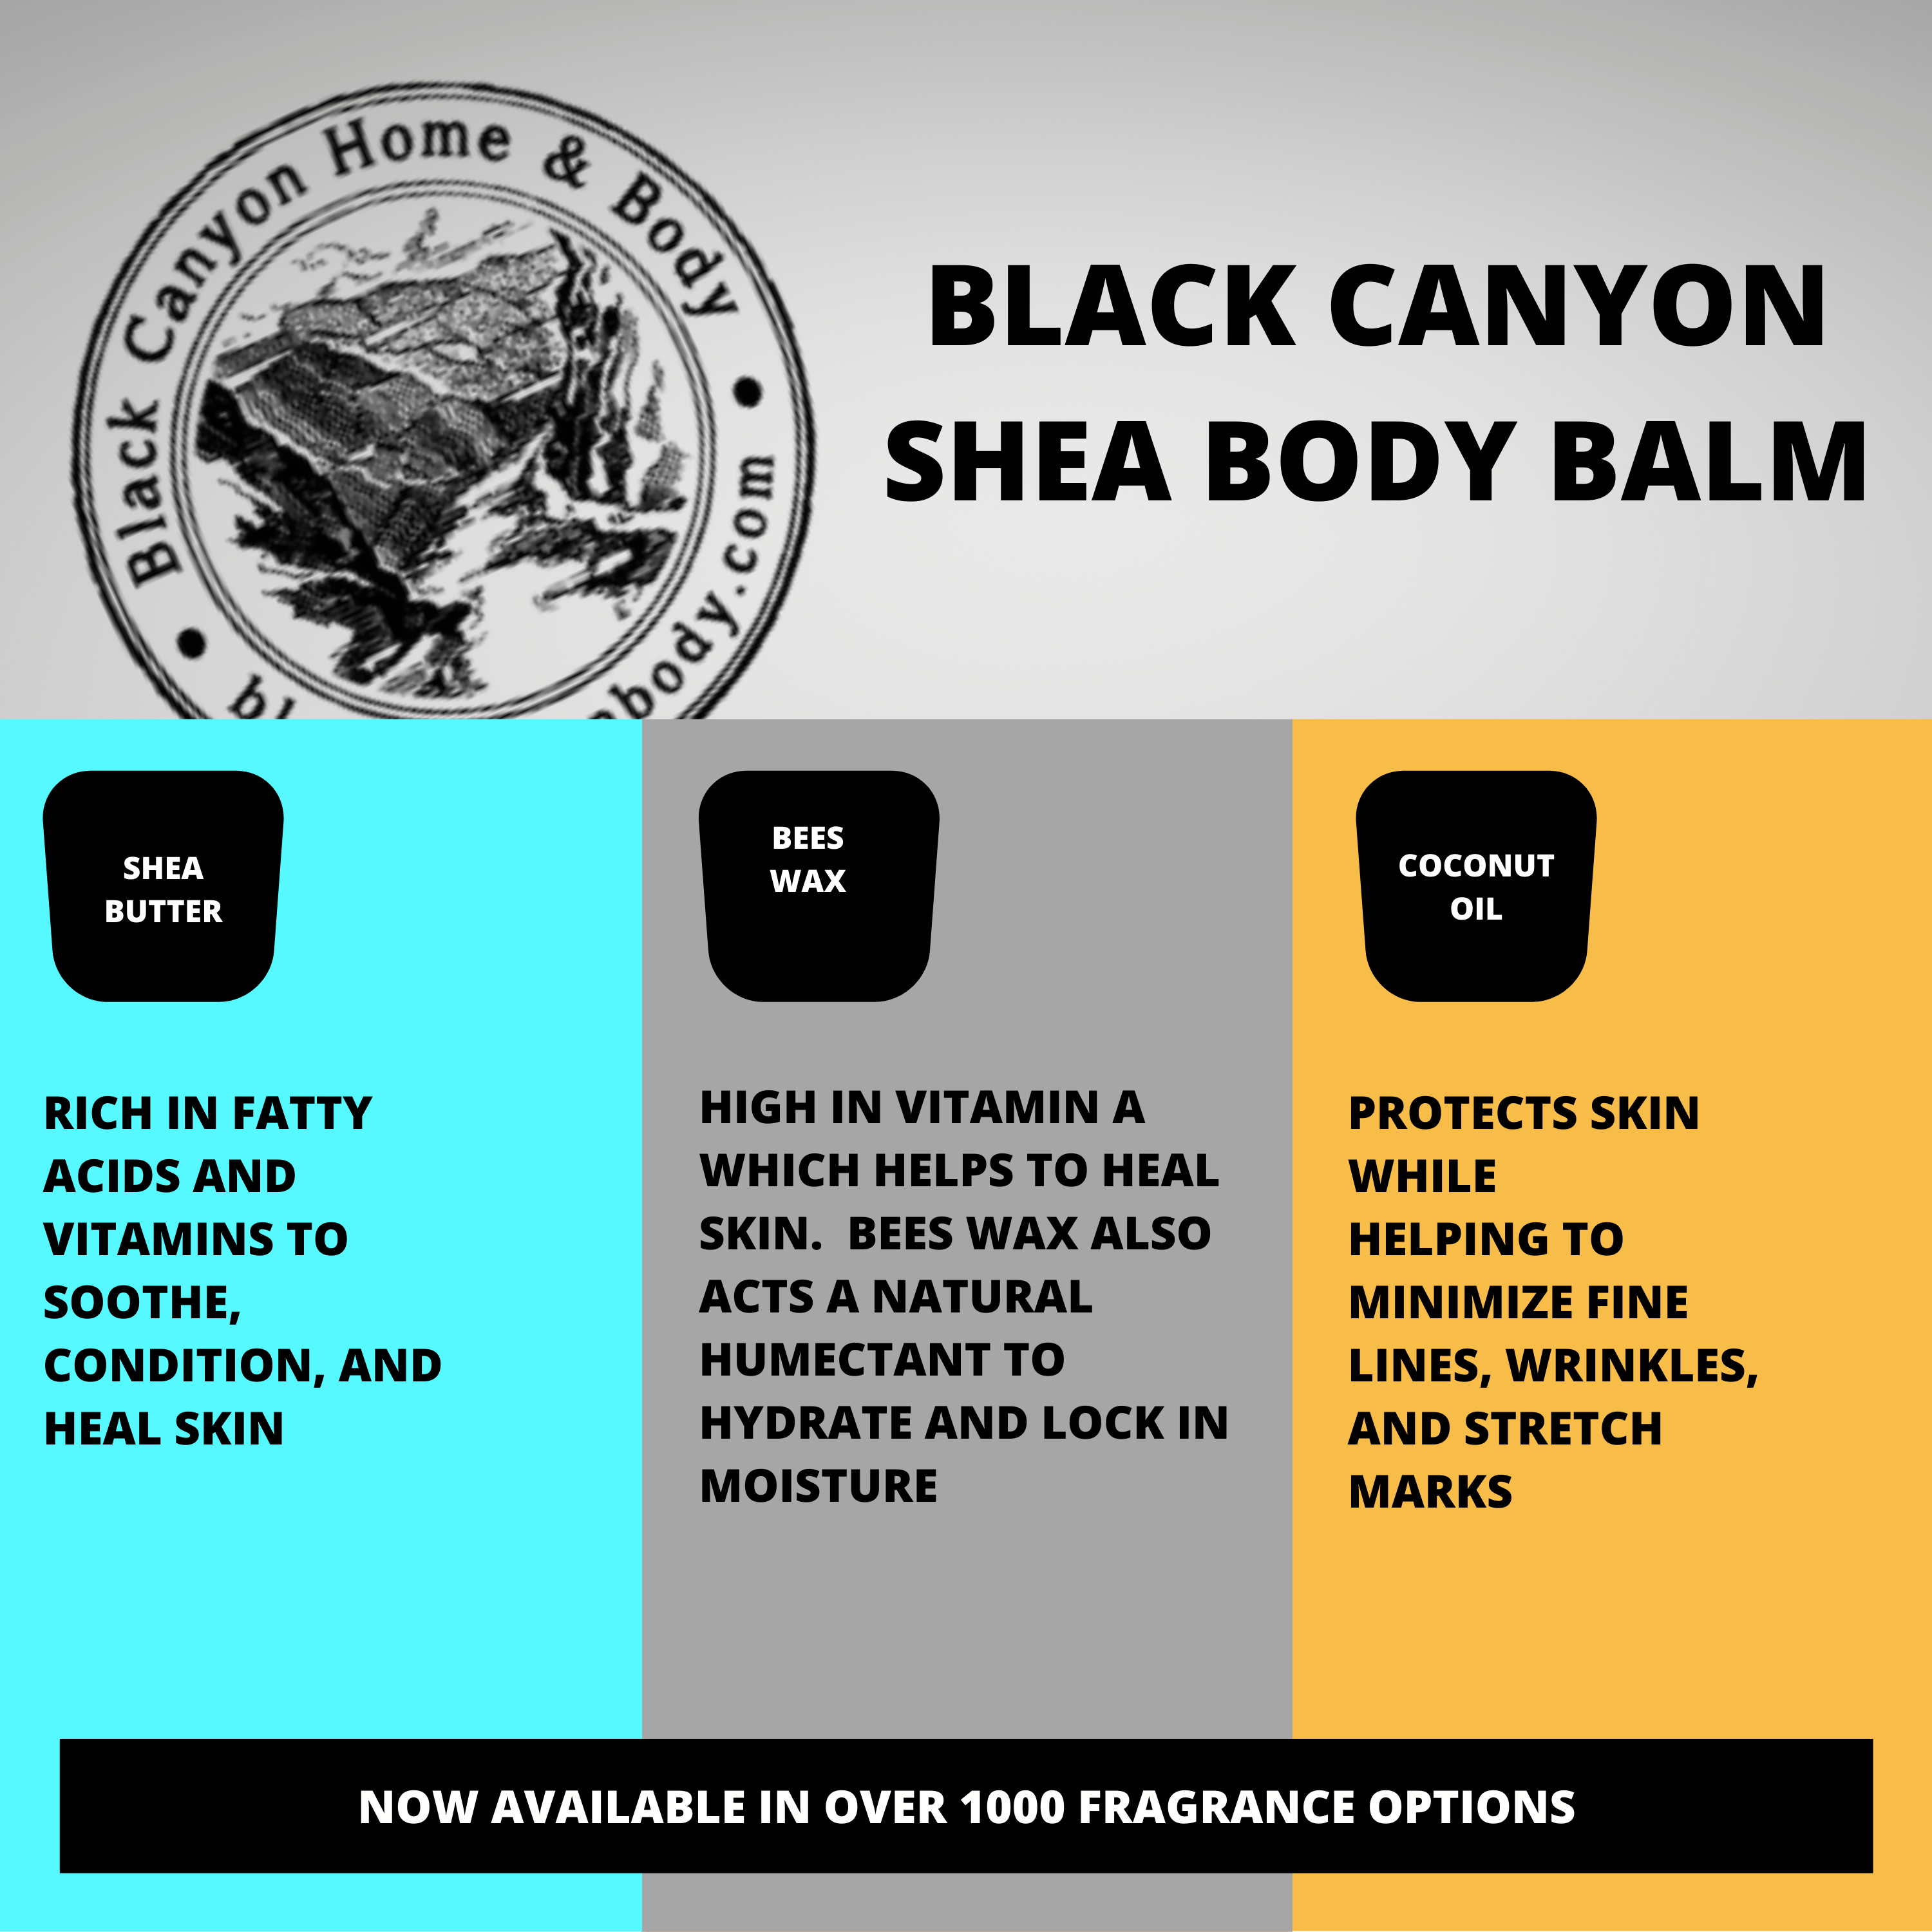 Black Canyon Apple & Blackberry Rose Scented Natural Body Balm with Shea